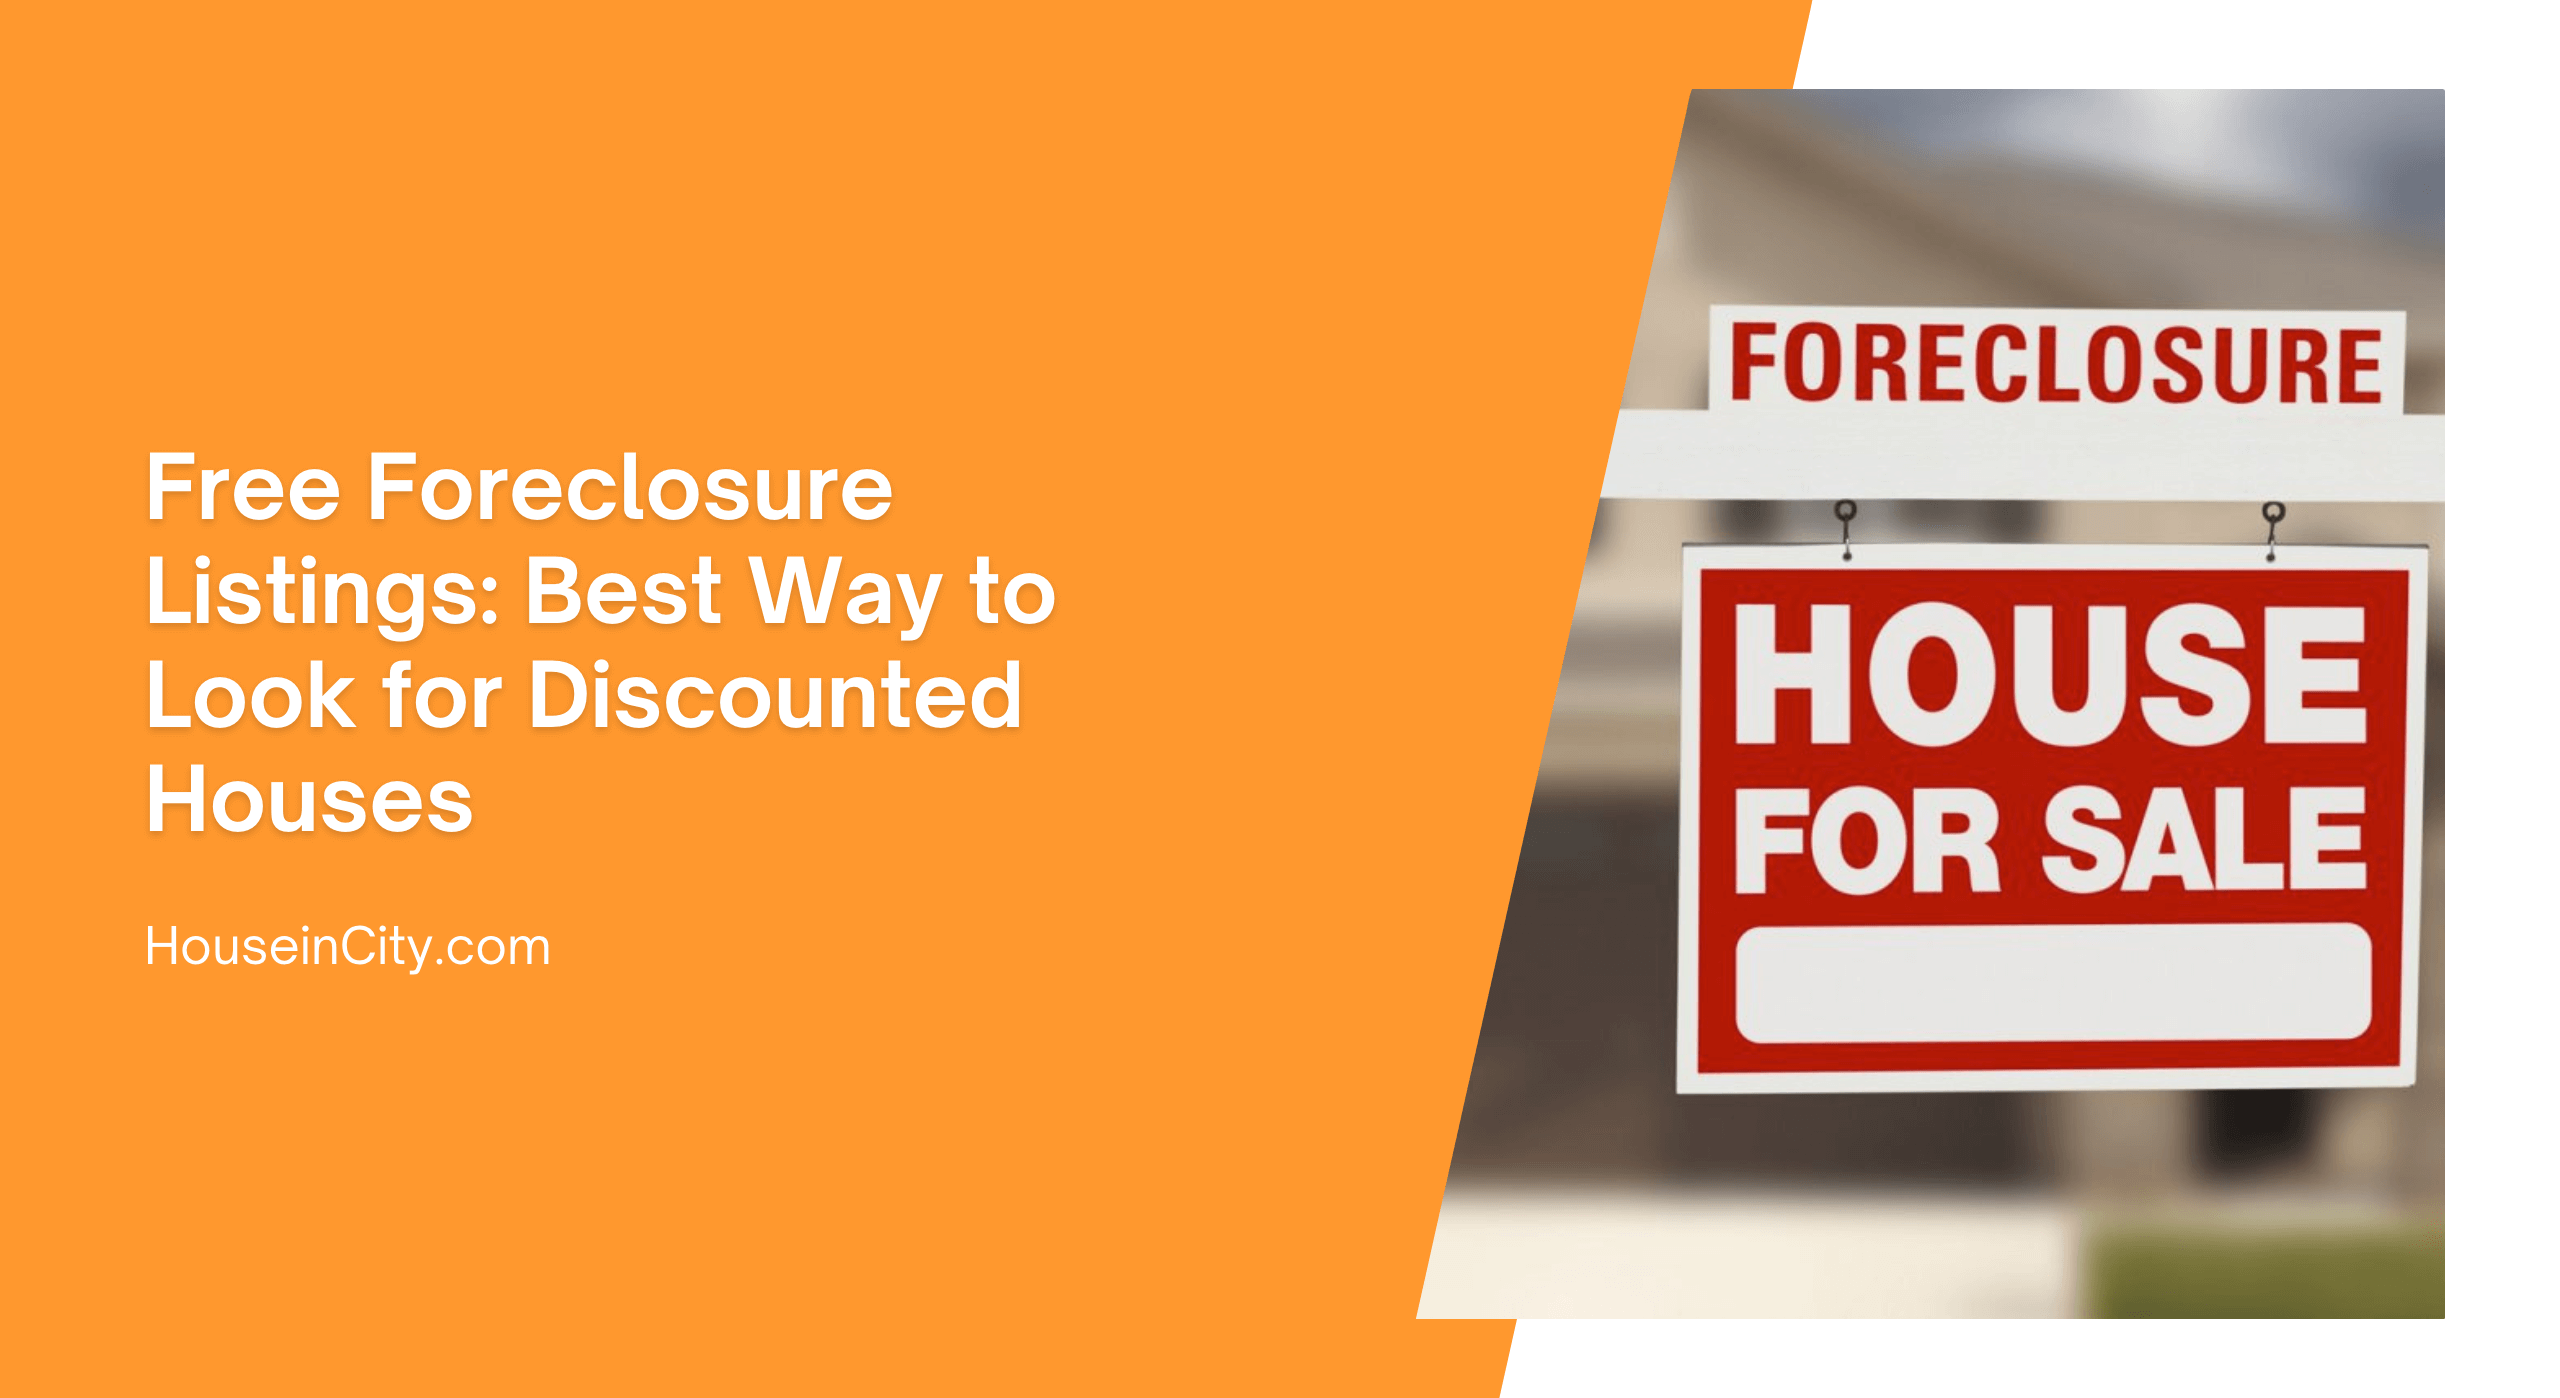 Free Foreclosure Listings: Best Way to Look for Discounted Houses